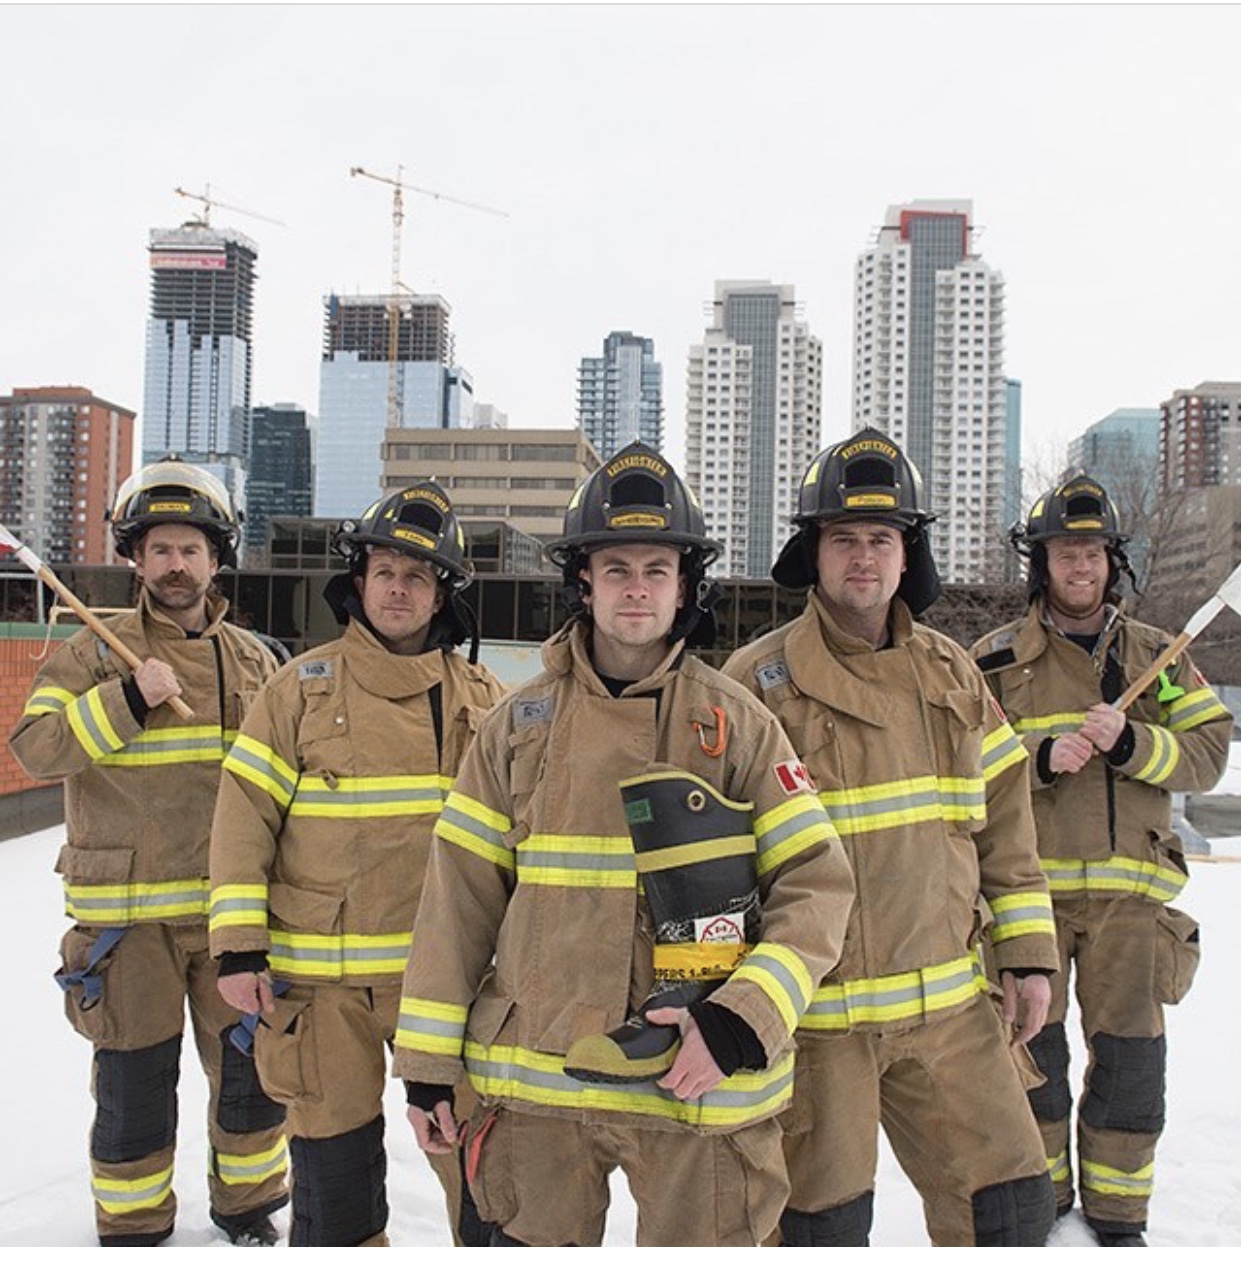 Edmonton Firefighters Rooftop Campout For Muscular Dystrophy GlobalNews Events